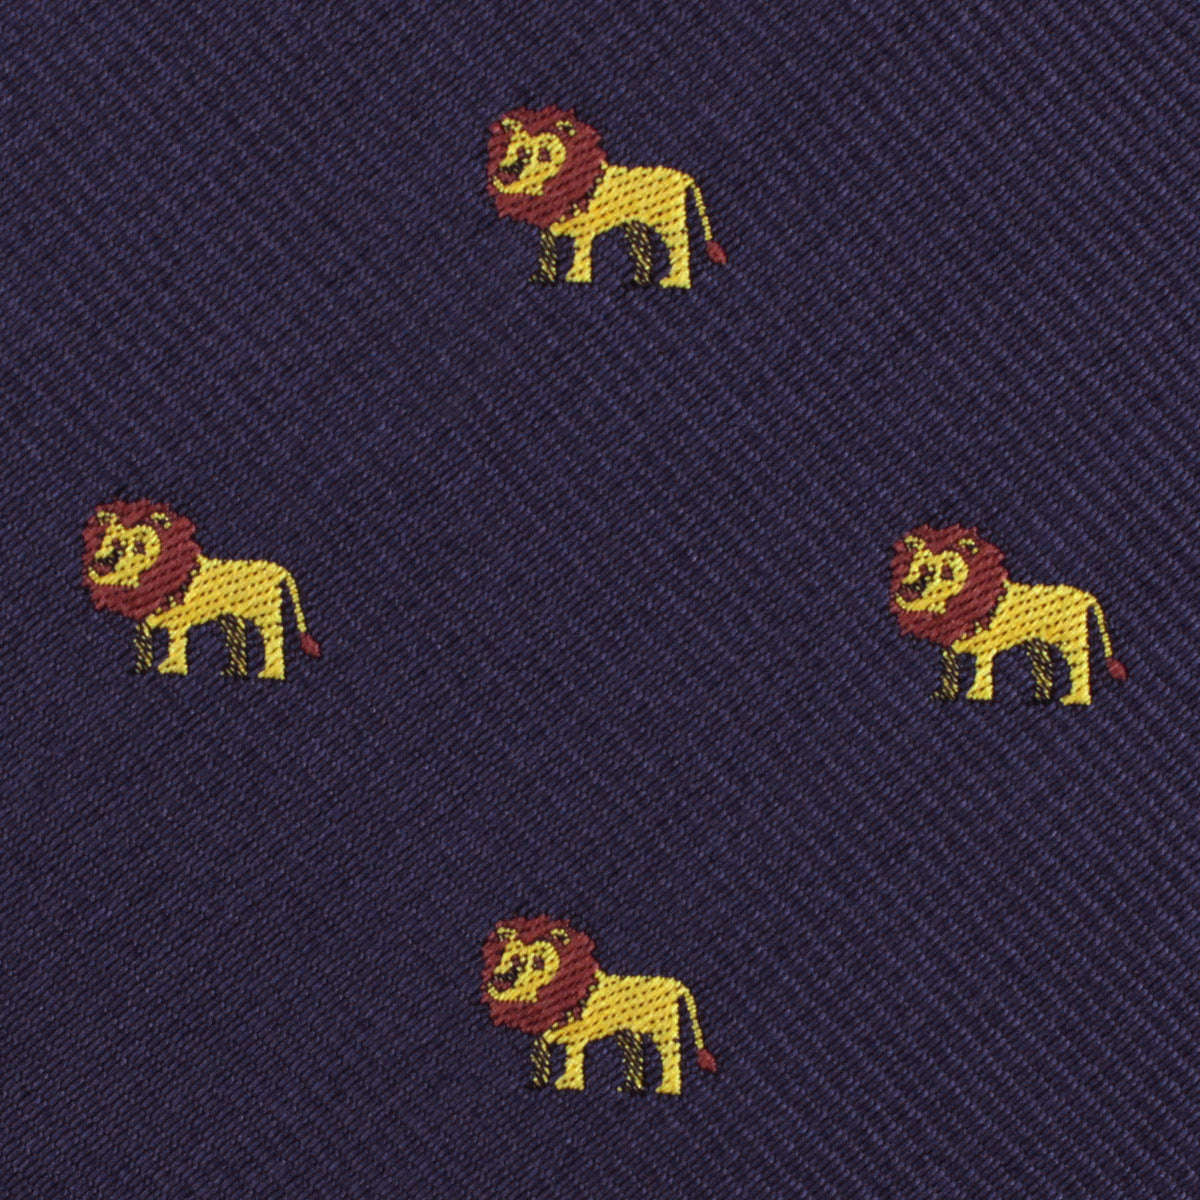 African Lion Fabric Pocket Square